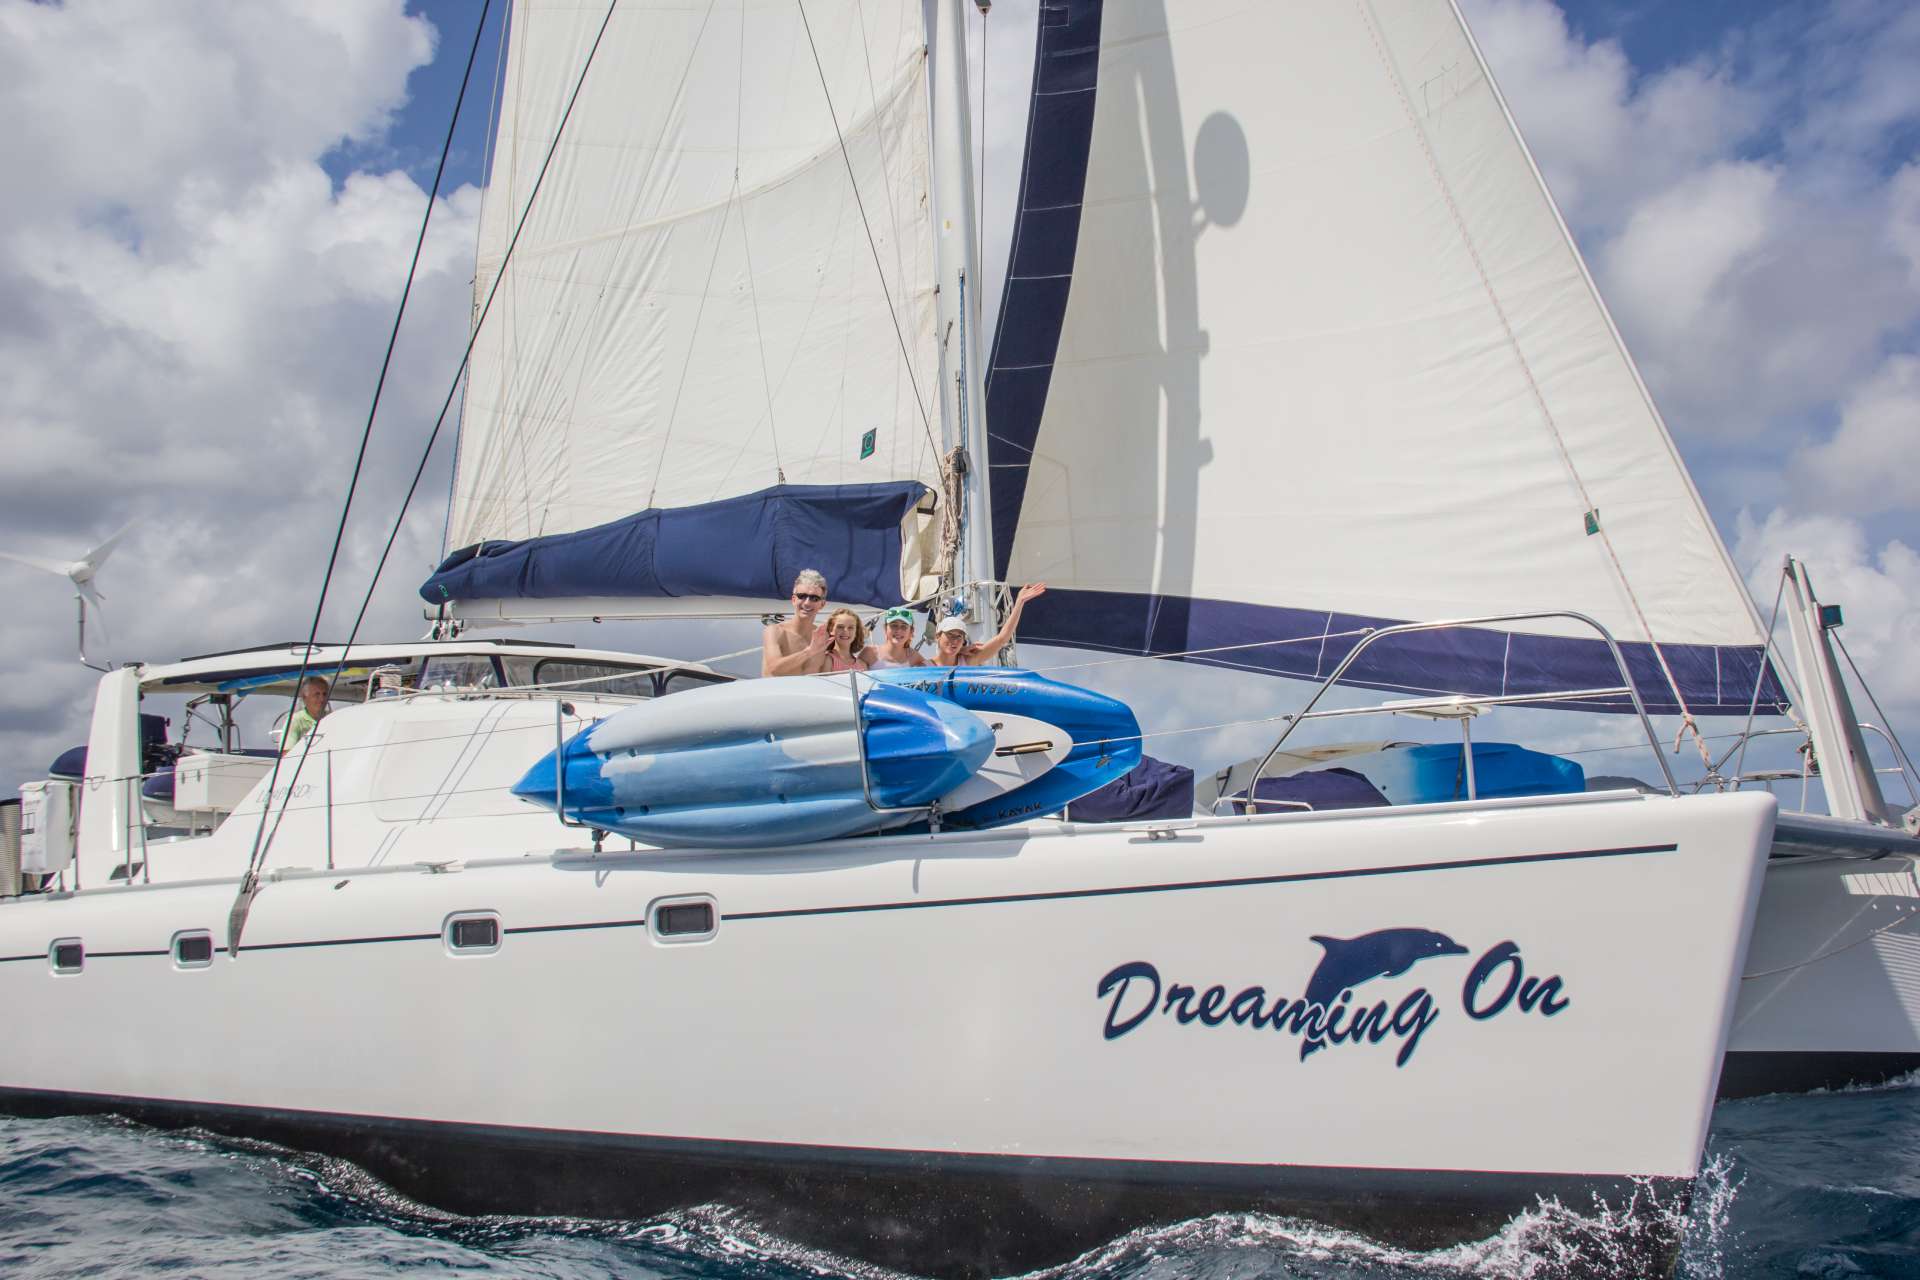 dreaming on - Yacht Charter Lindigo & Boat hire in Central america, Belize 2